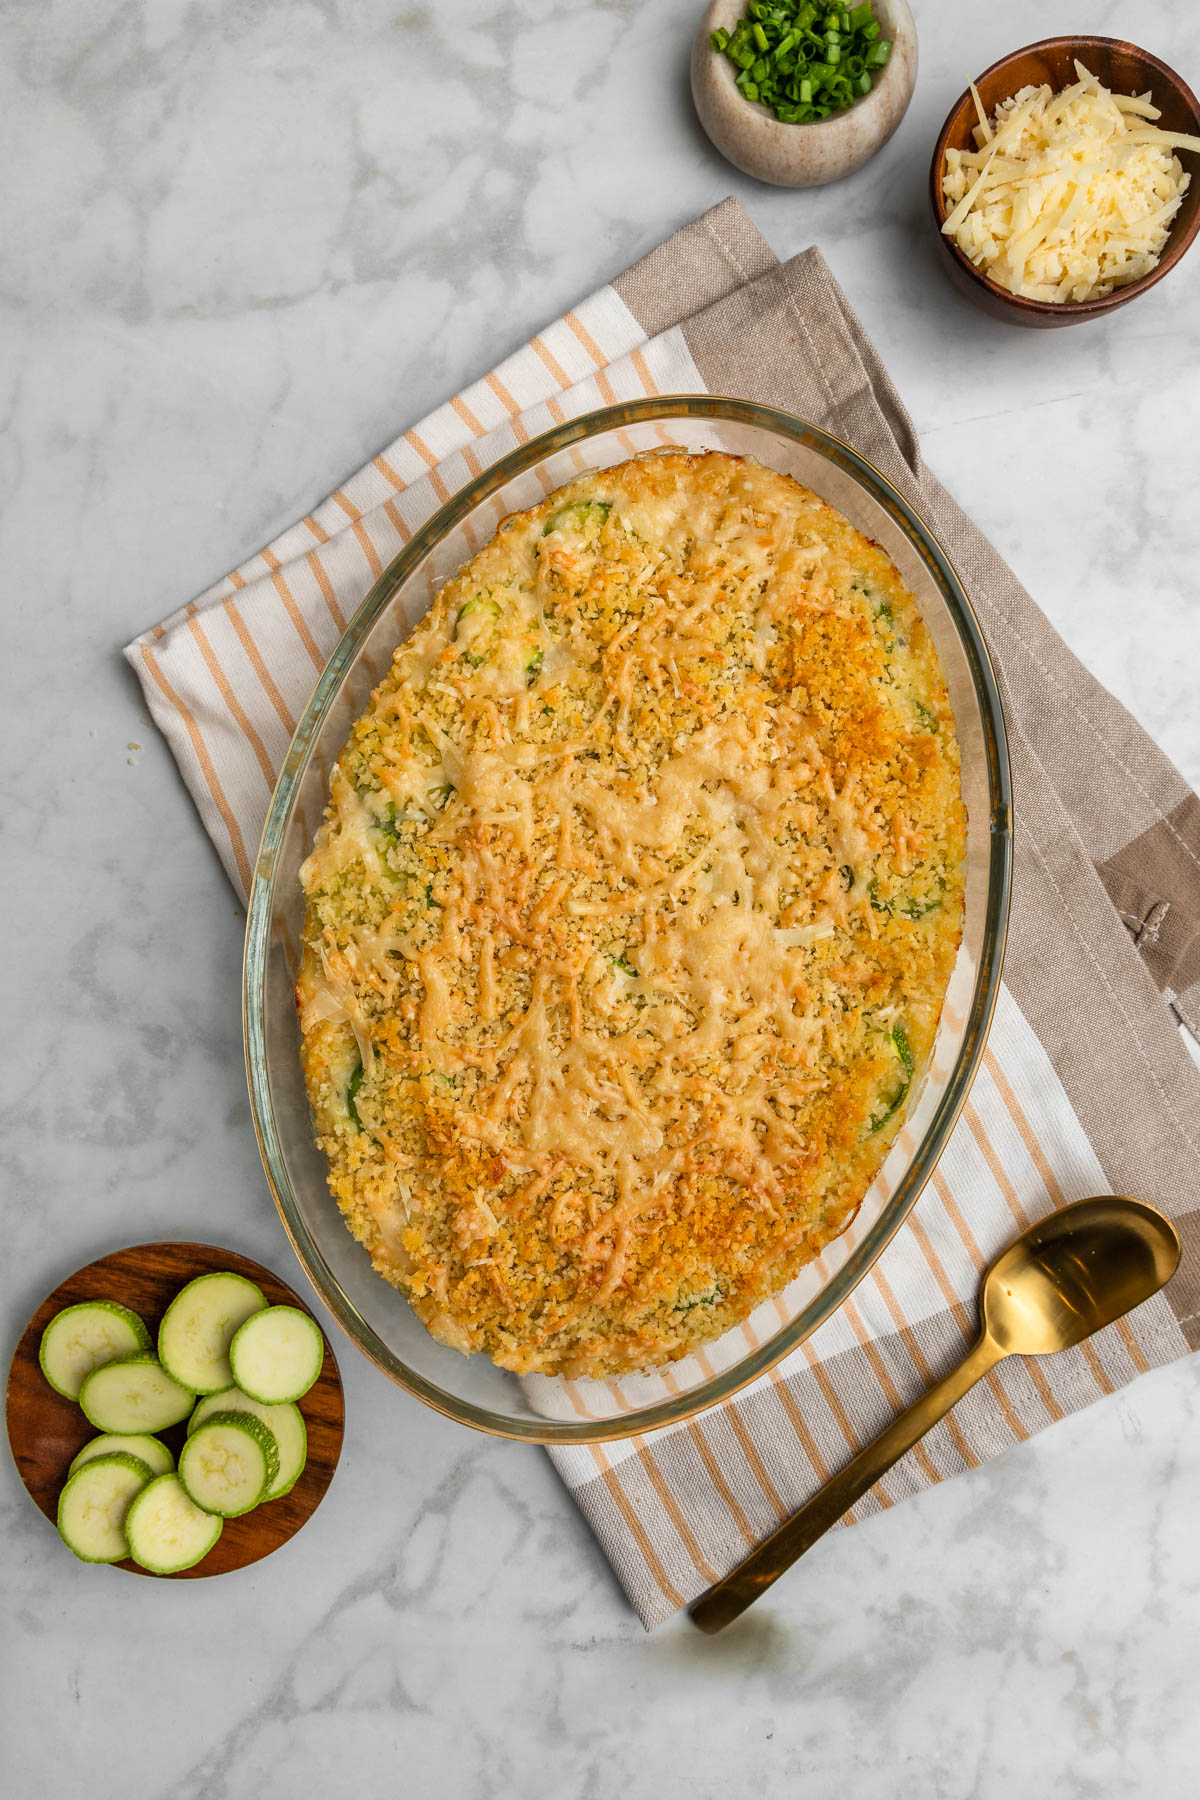 Baked zucchini in a casserole dish with raw zucchinis on the side.